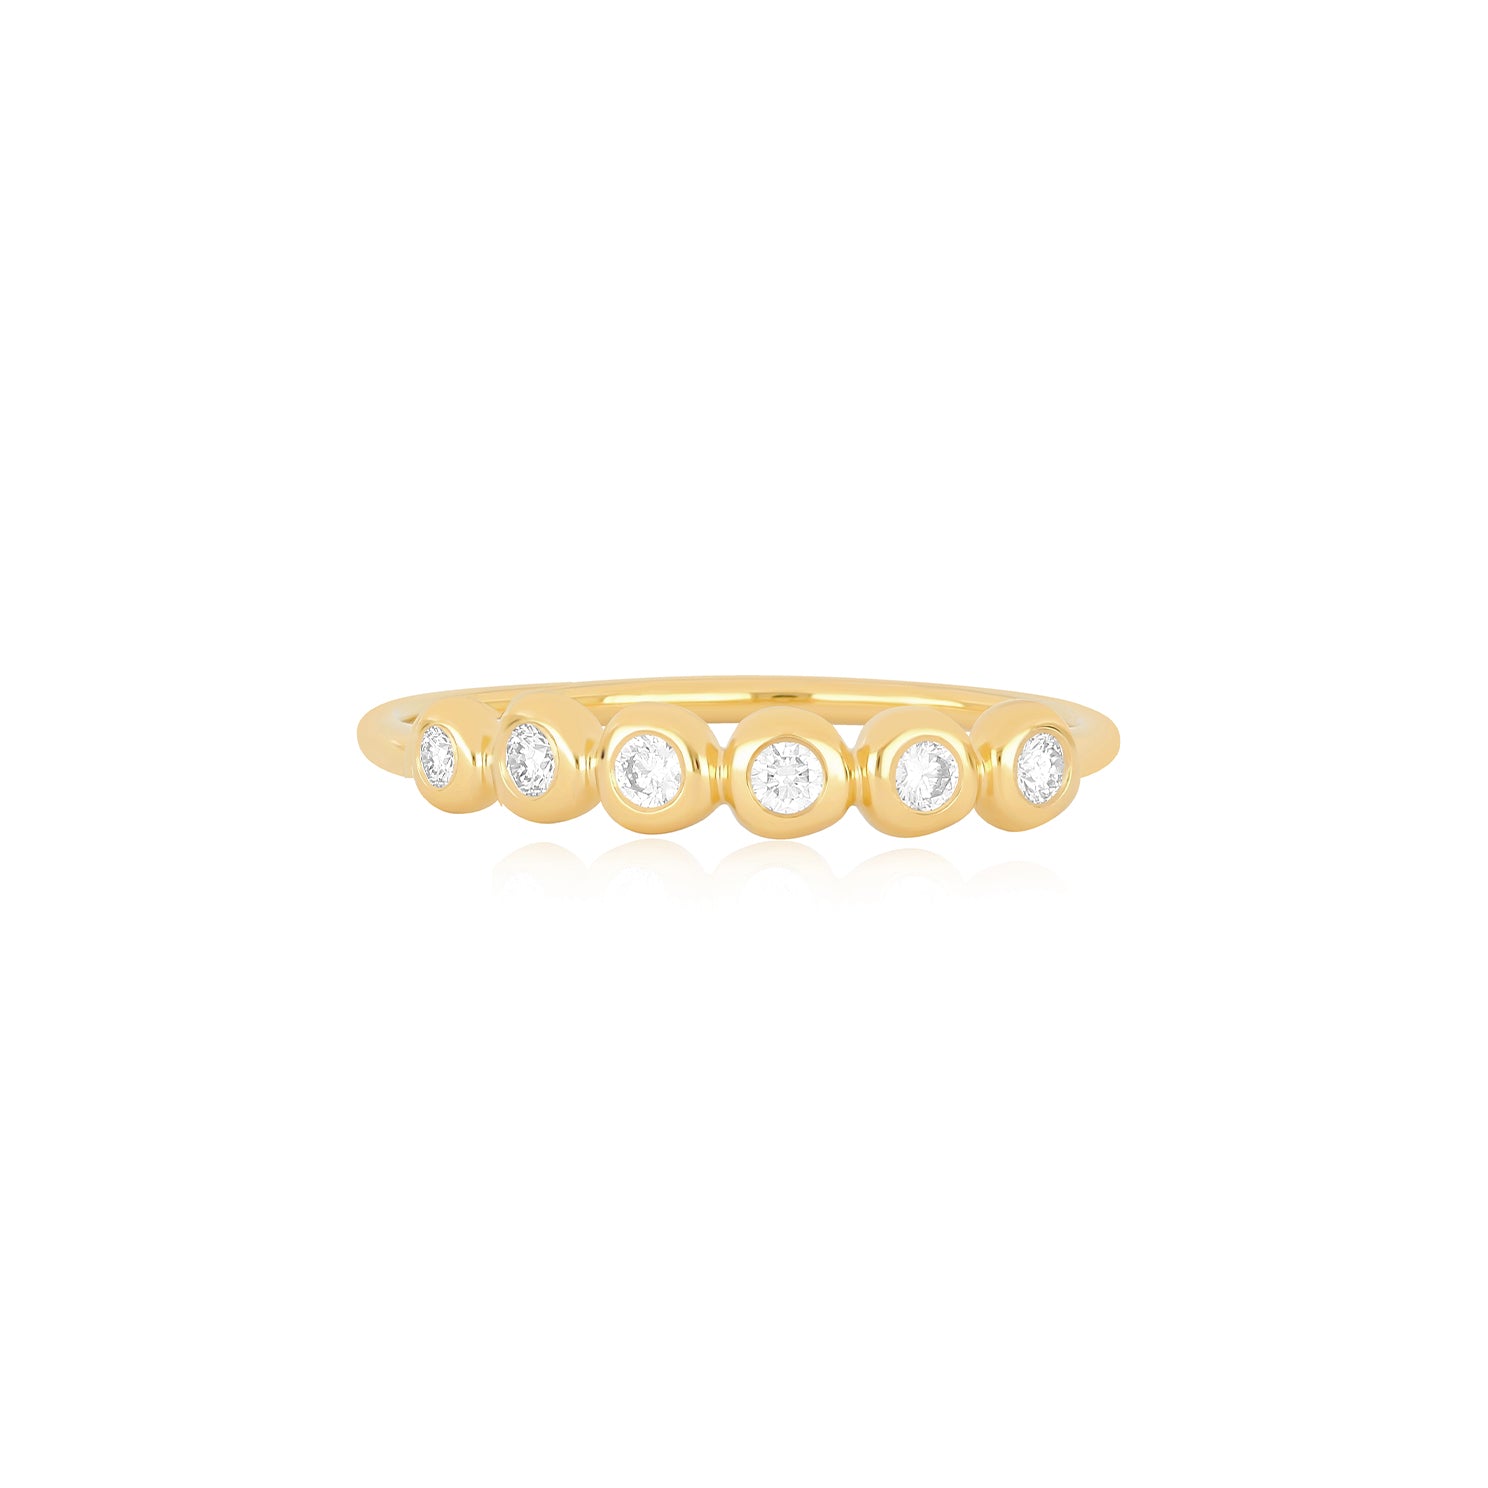 Diamond Pillow Stack Ring in 14k yellow gold